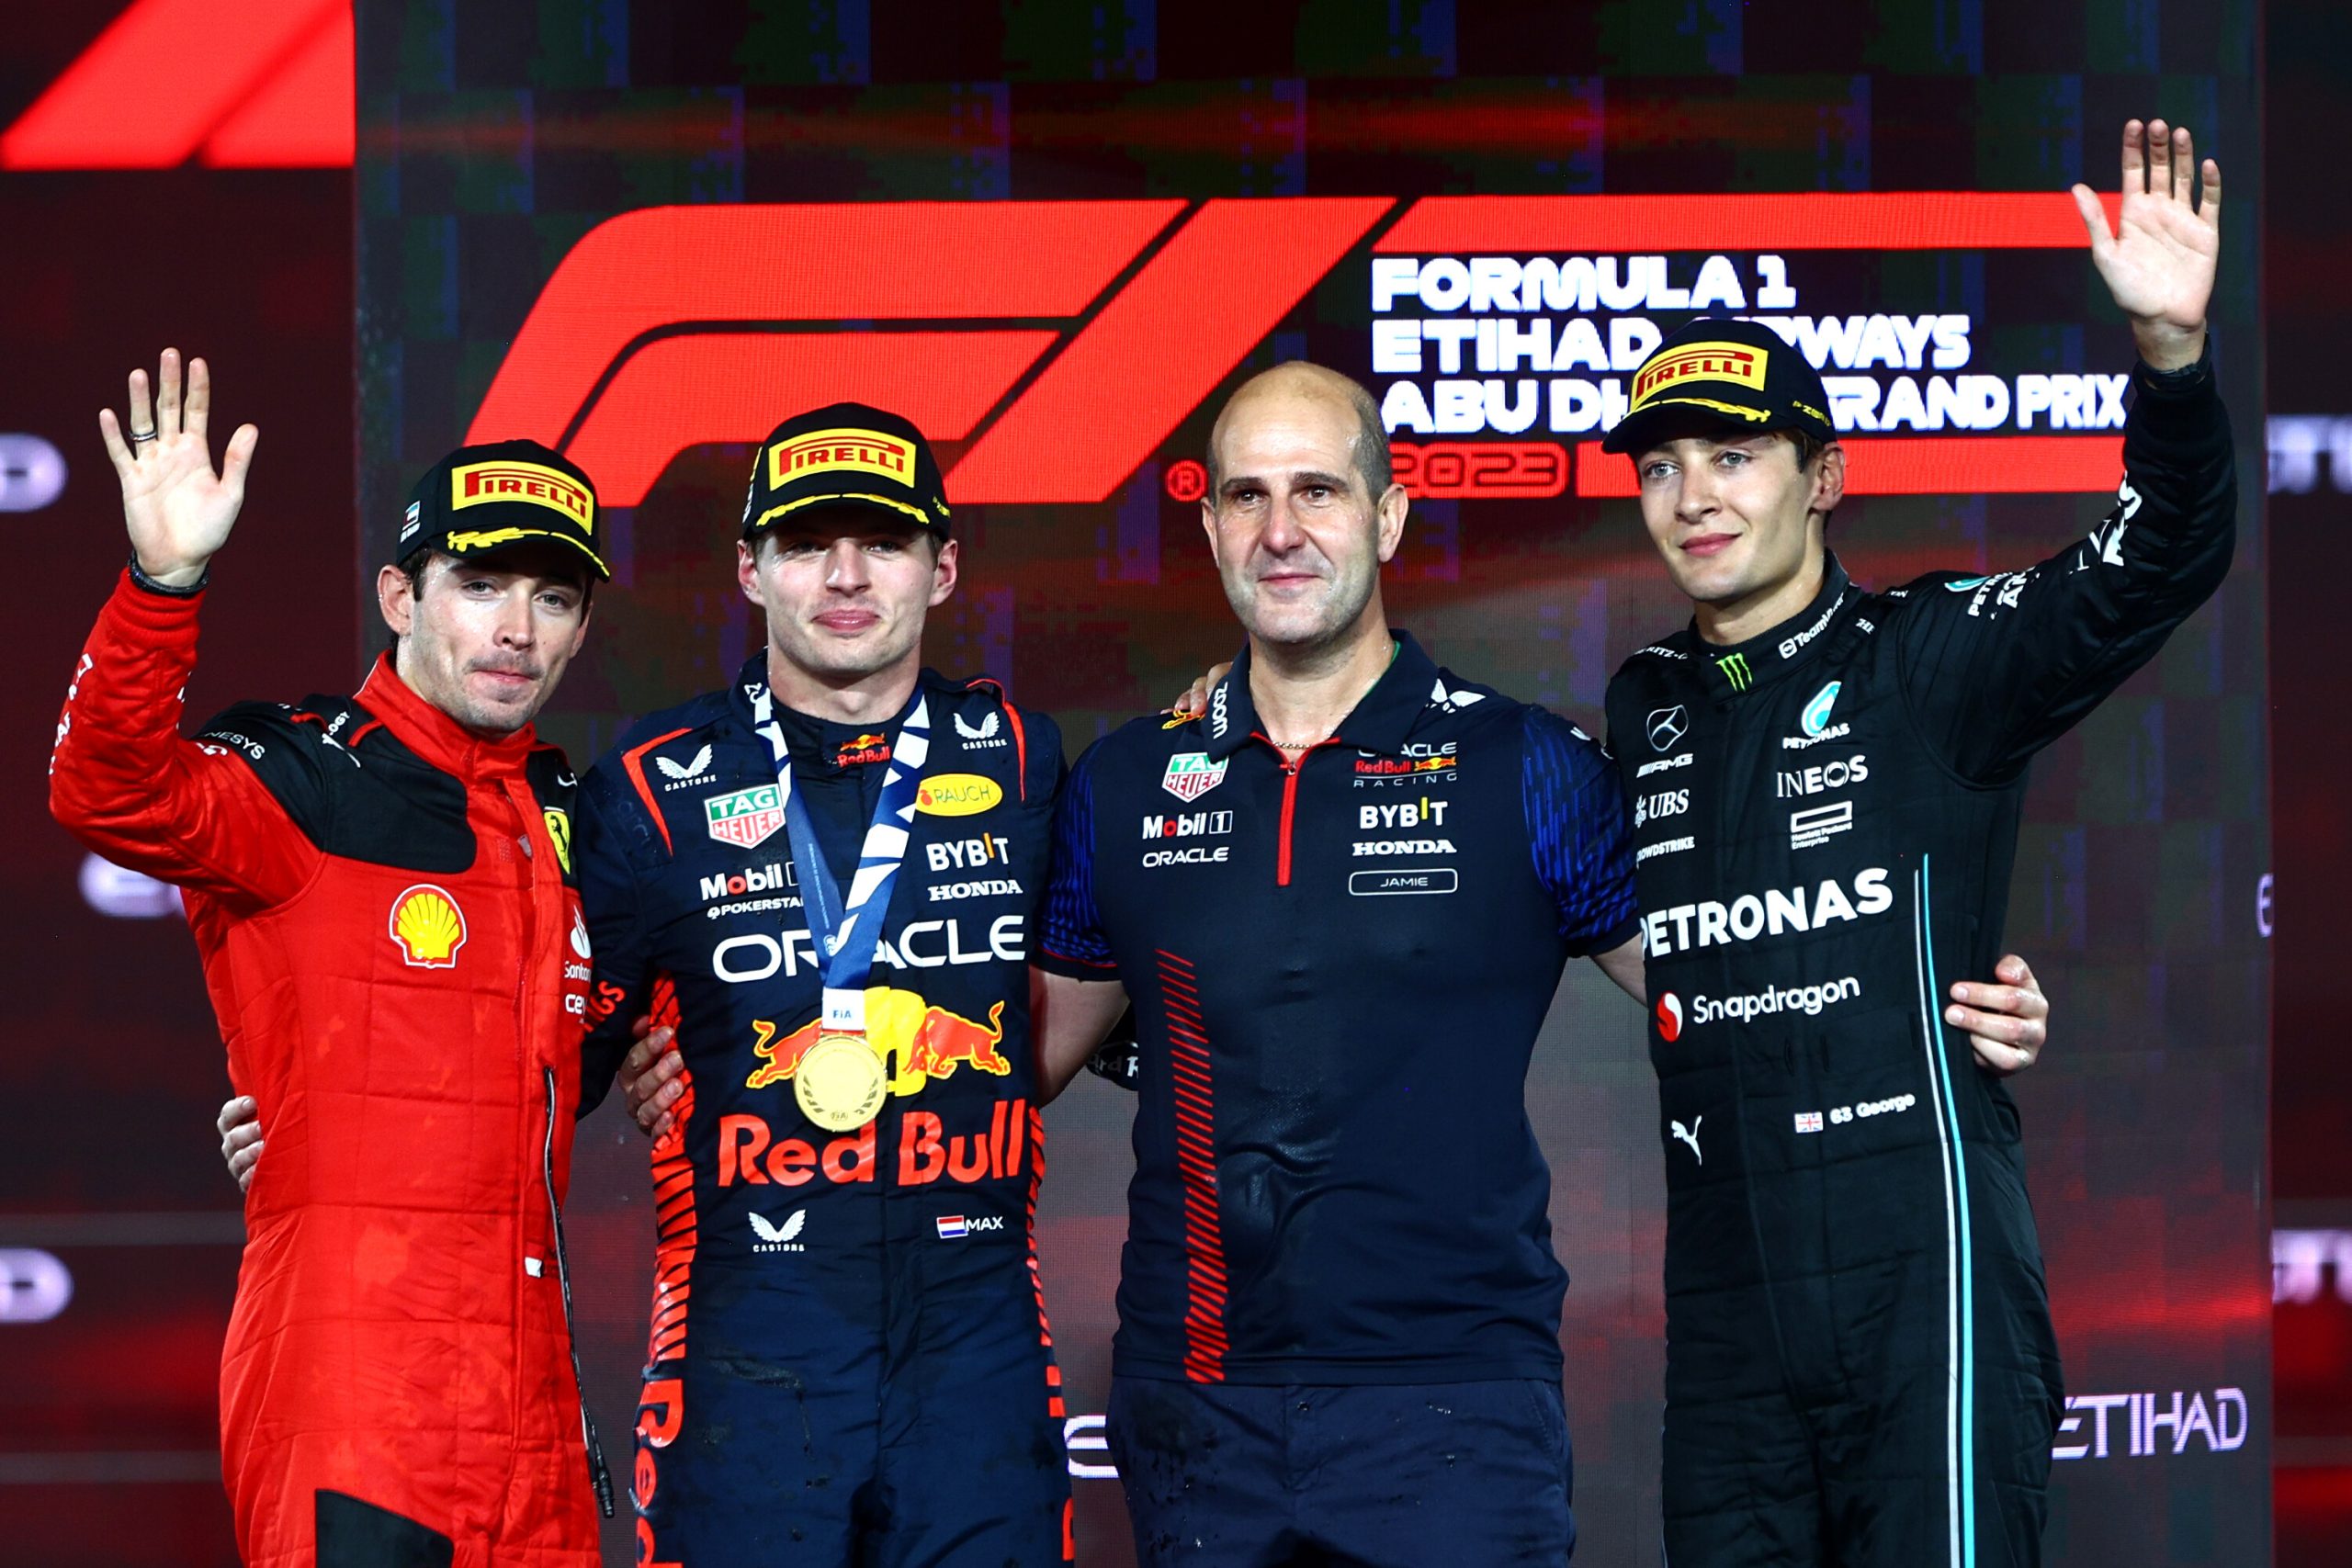 Max Verstappen of Red Bull Racing, Charles Leclerc of Ferrari and George Russell of Mercedes on the podium at the Abu Dhabi Grand Prix, 2023